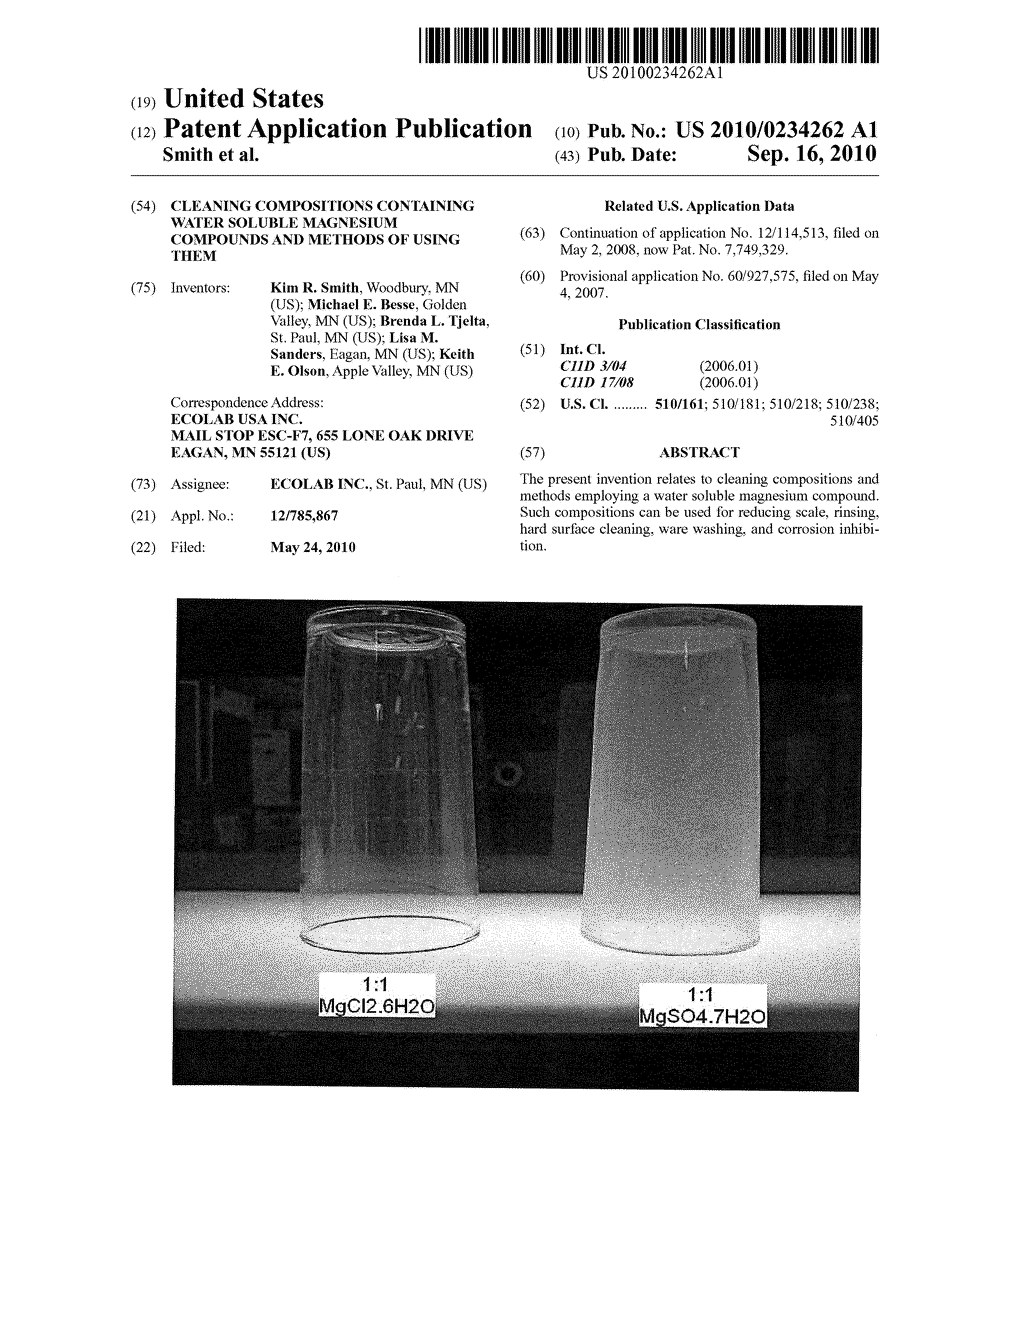 CLEANING COMPOSITIONS CONTAINING WATER SOLUBLE MAGNESIUM COMPOUNDS AND METHODS OF USING THEM - diagram, schematic, and image 01